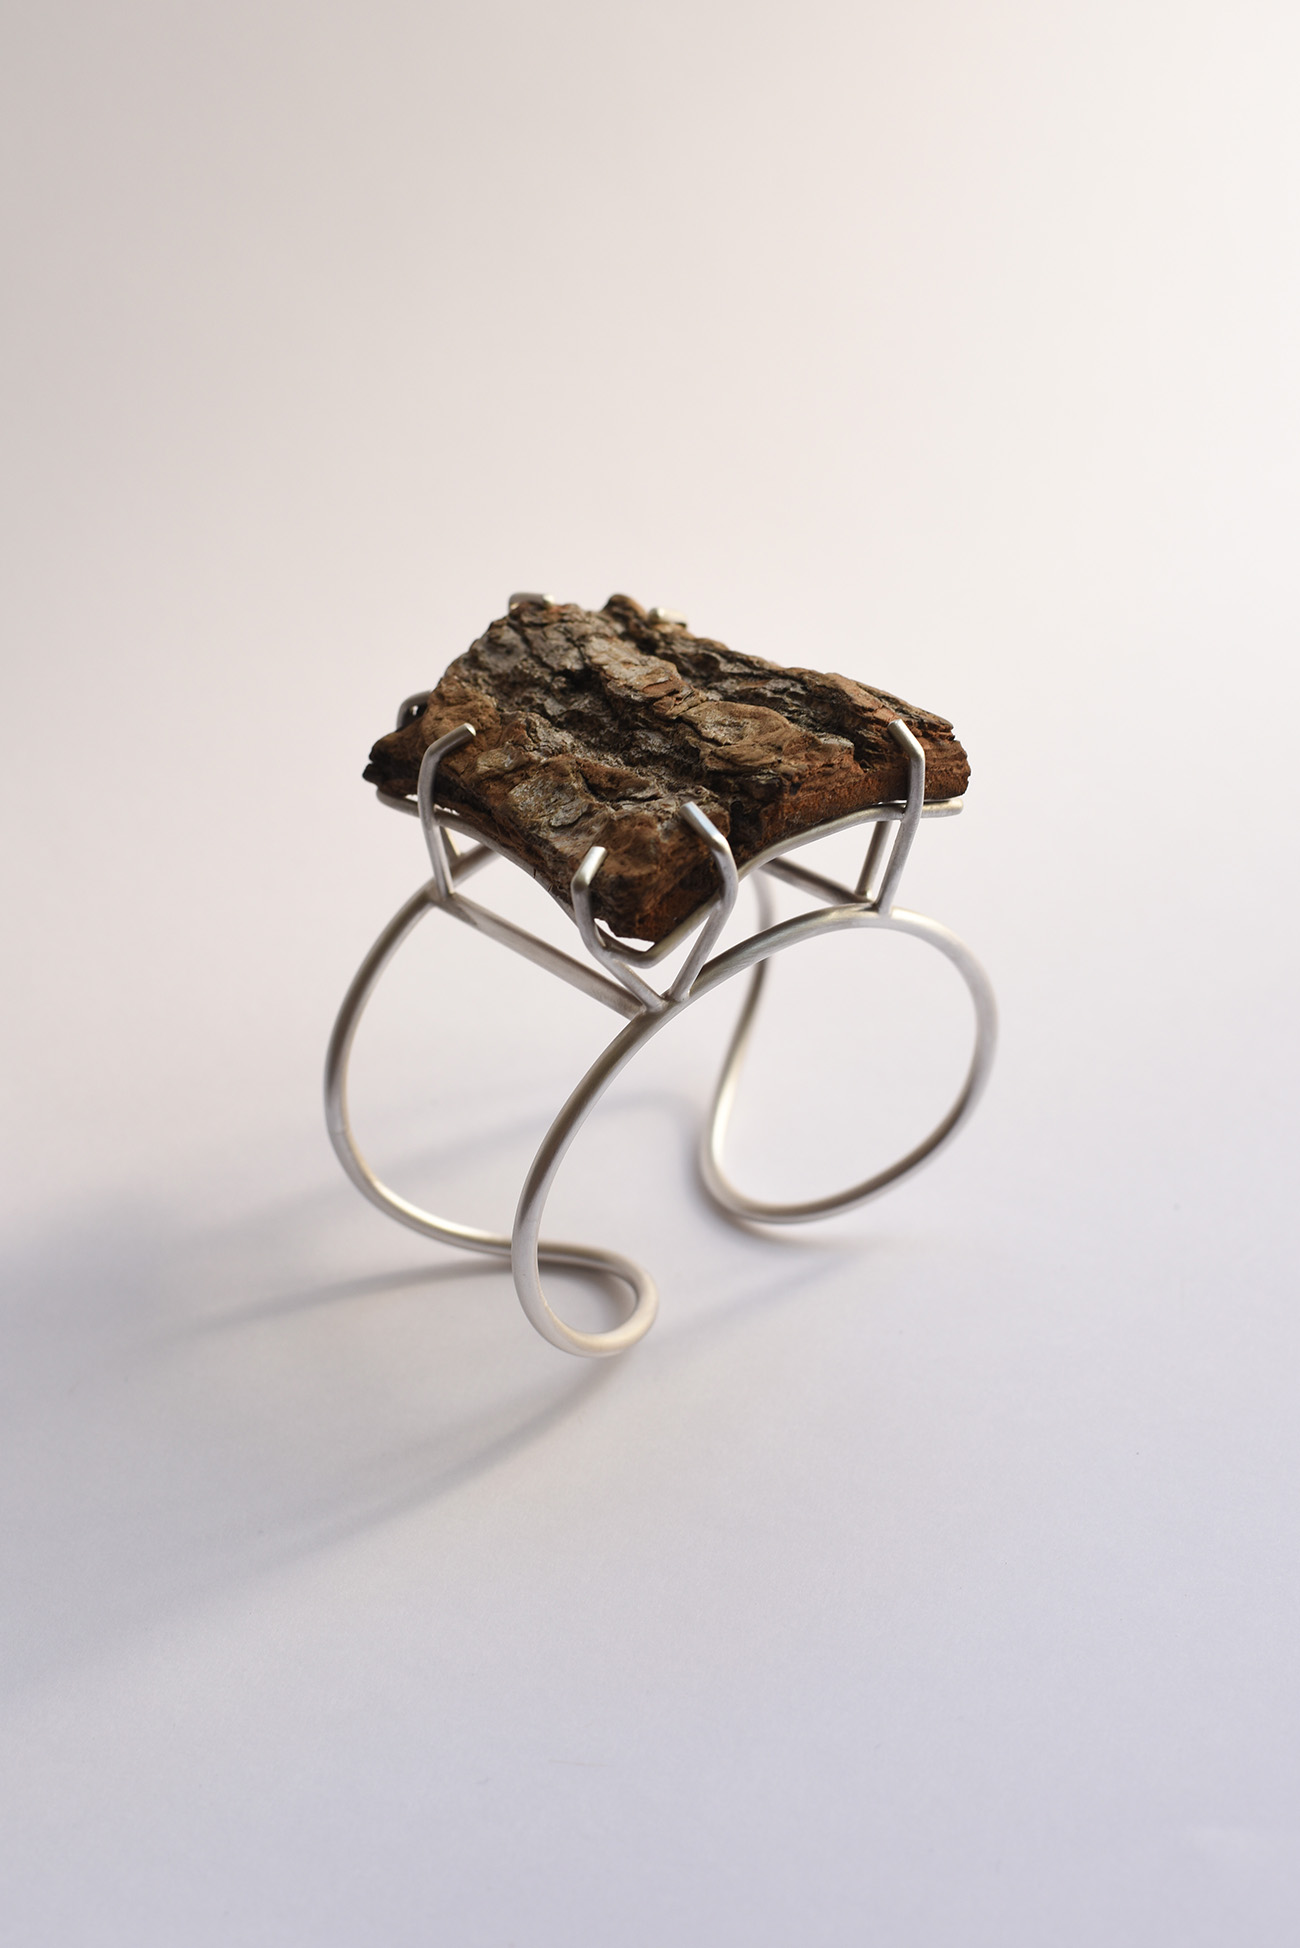 Force of nature, pine wood bark and silver bracelet by Laura Guitte